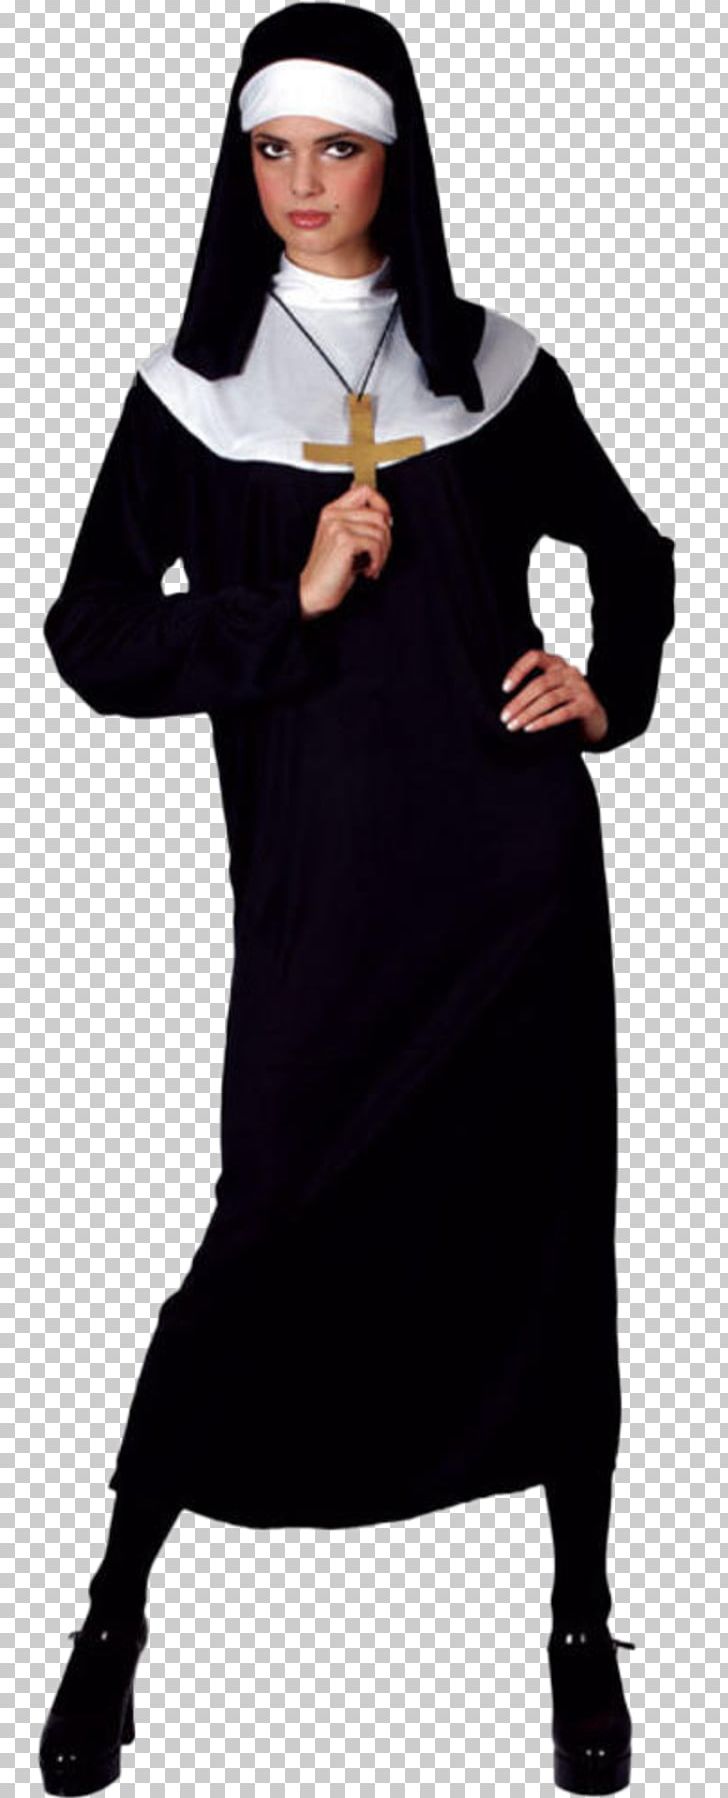 Costume Party Mother Superior Nun Clothing PNG, Clipart, Abbess, Clothing, Clothing Sizes, Costume, Costume Party Free PNG Download